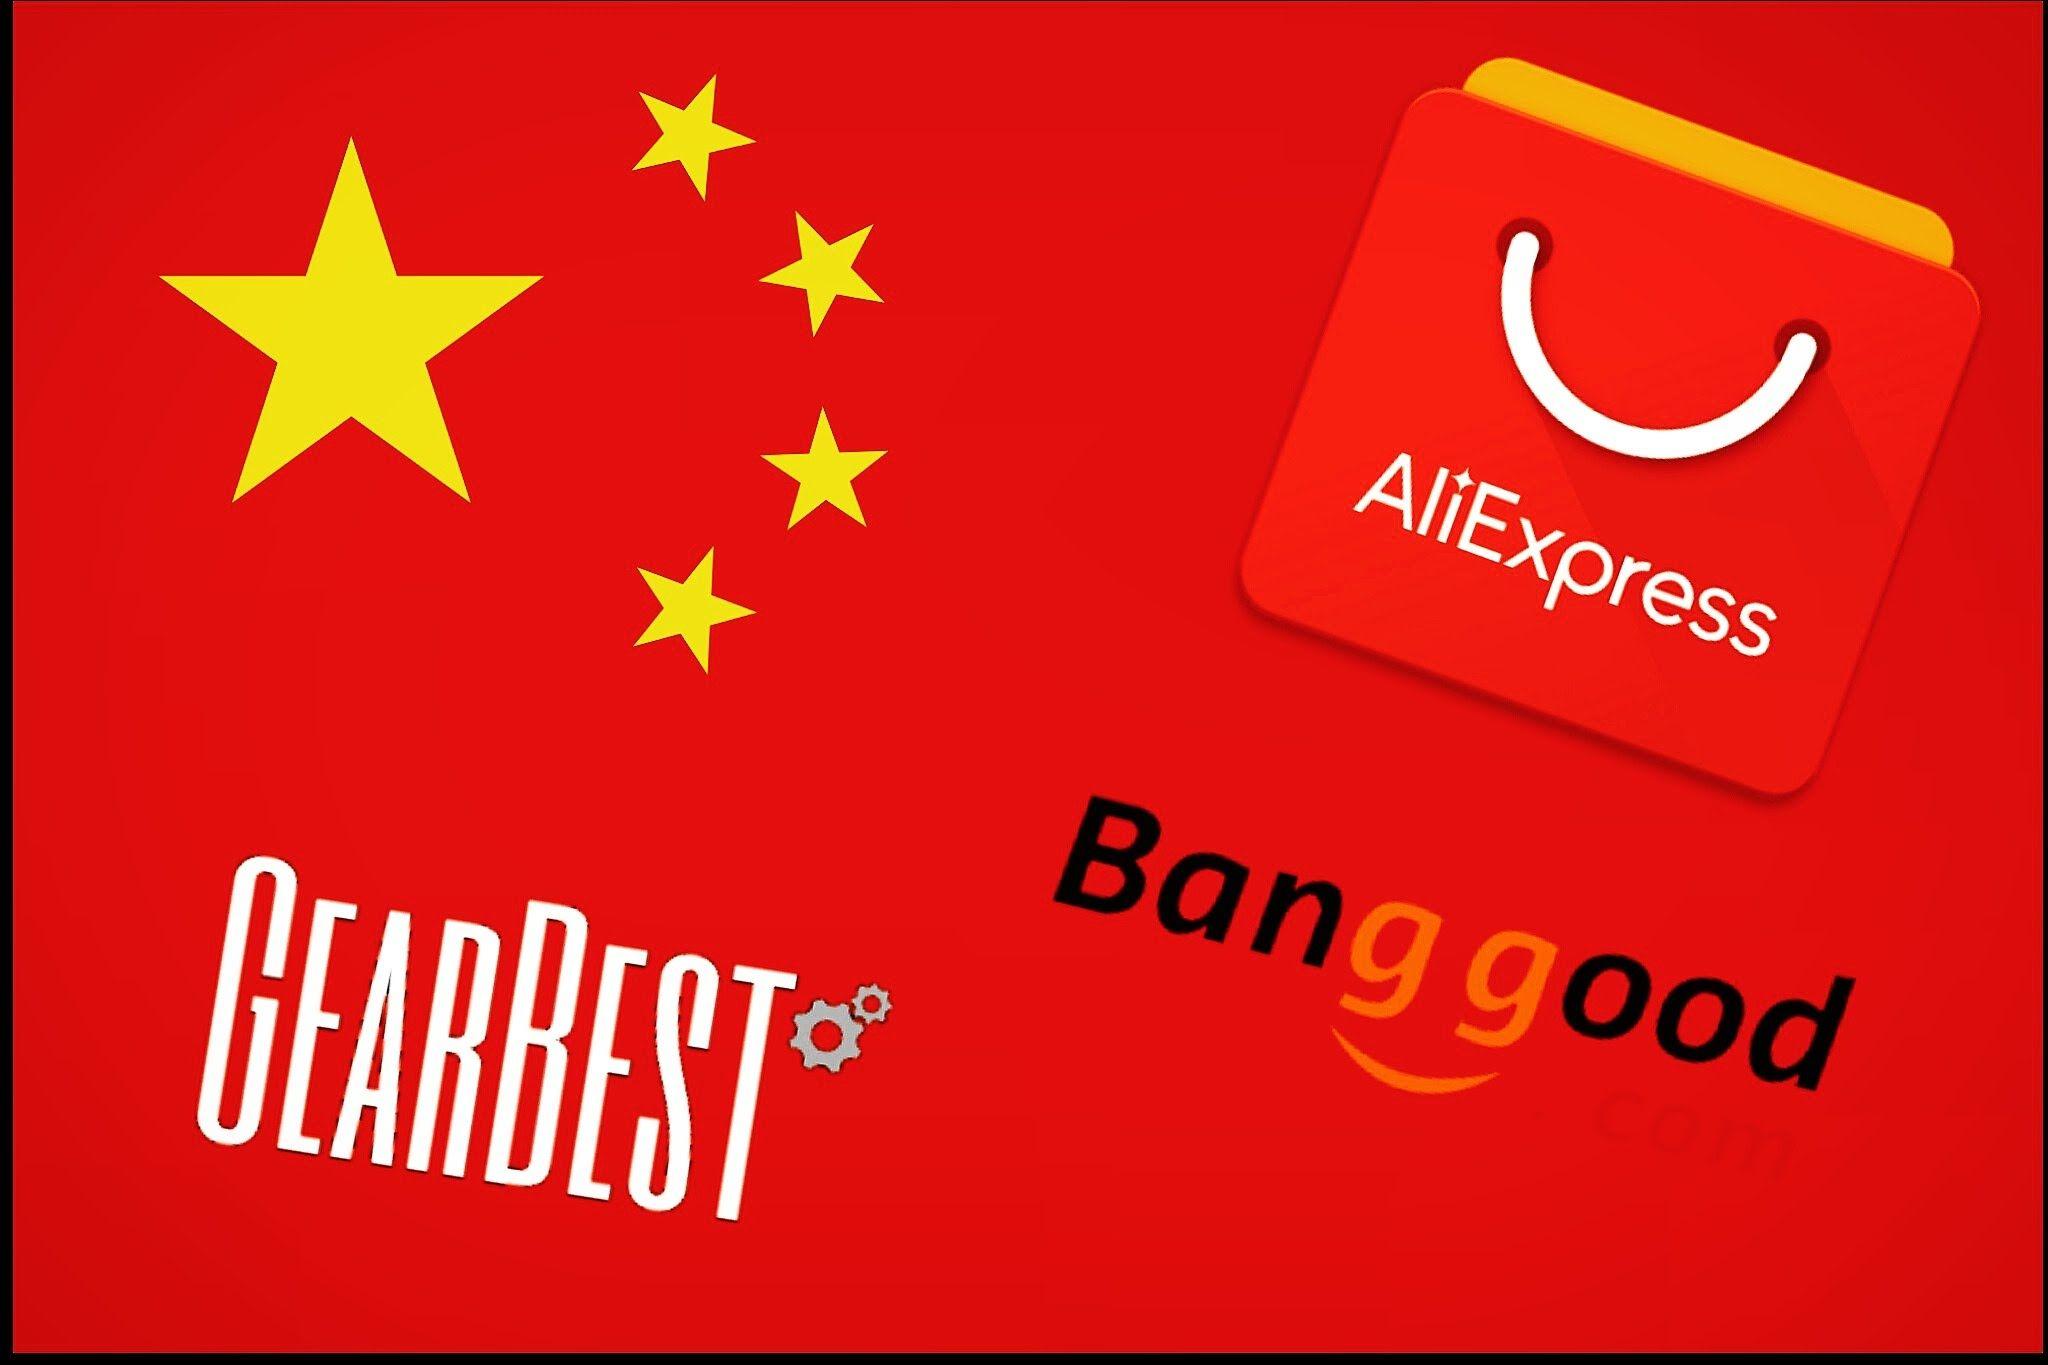 Gear Best Logo - How to buy Chinese Smartphones from Gearbest, Banggood